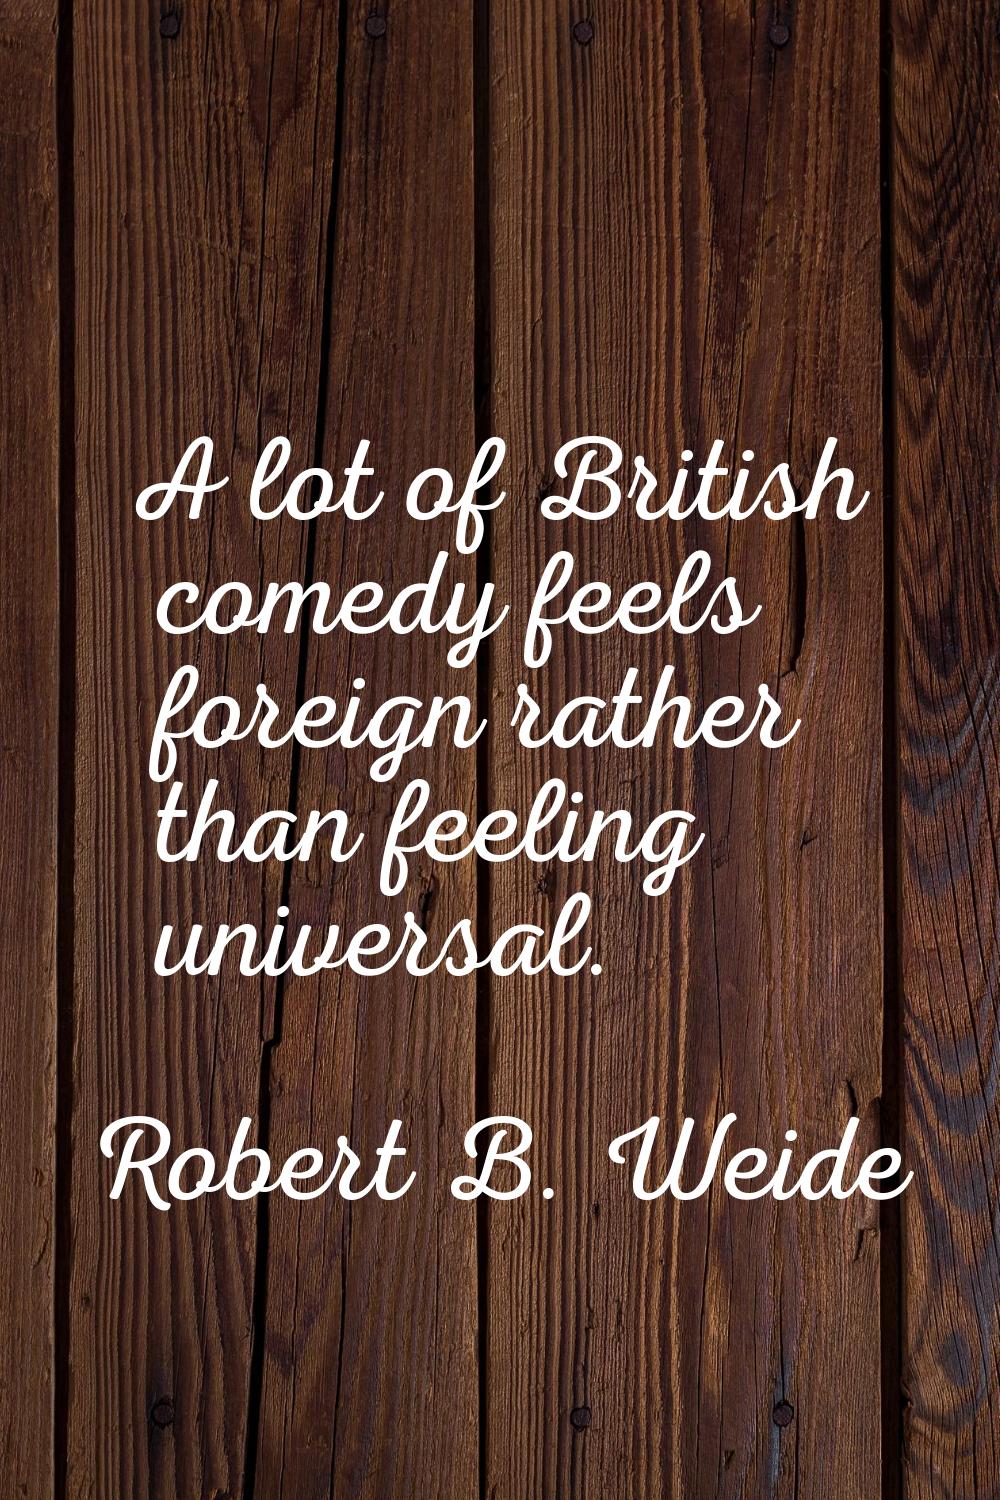 A lot of British comedy feels foreign rather than feeling universal.